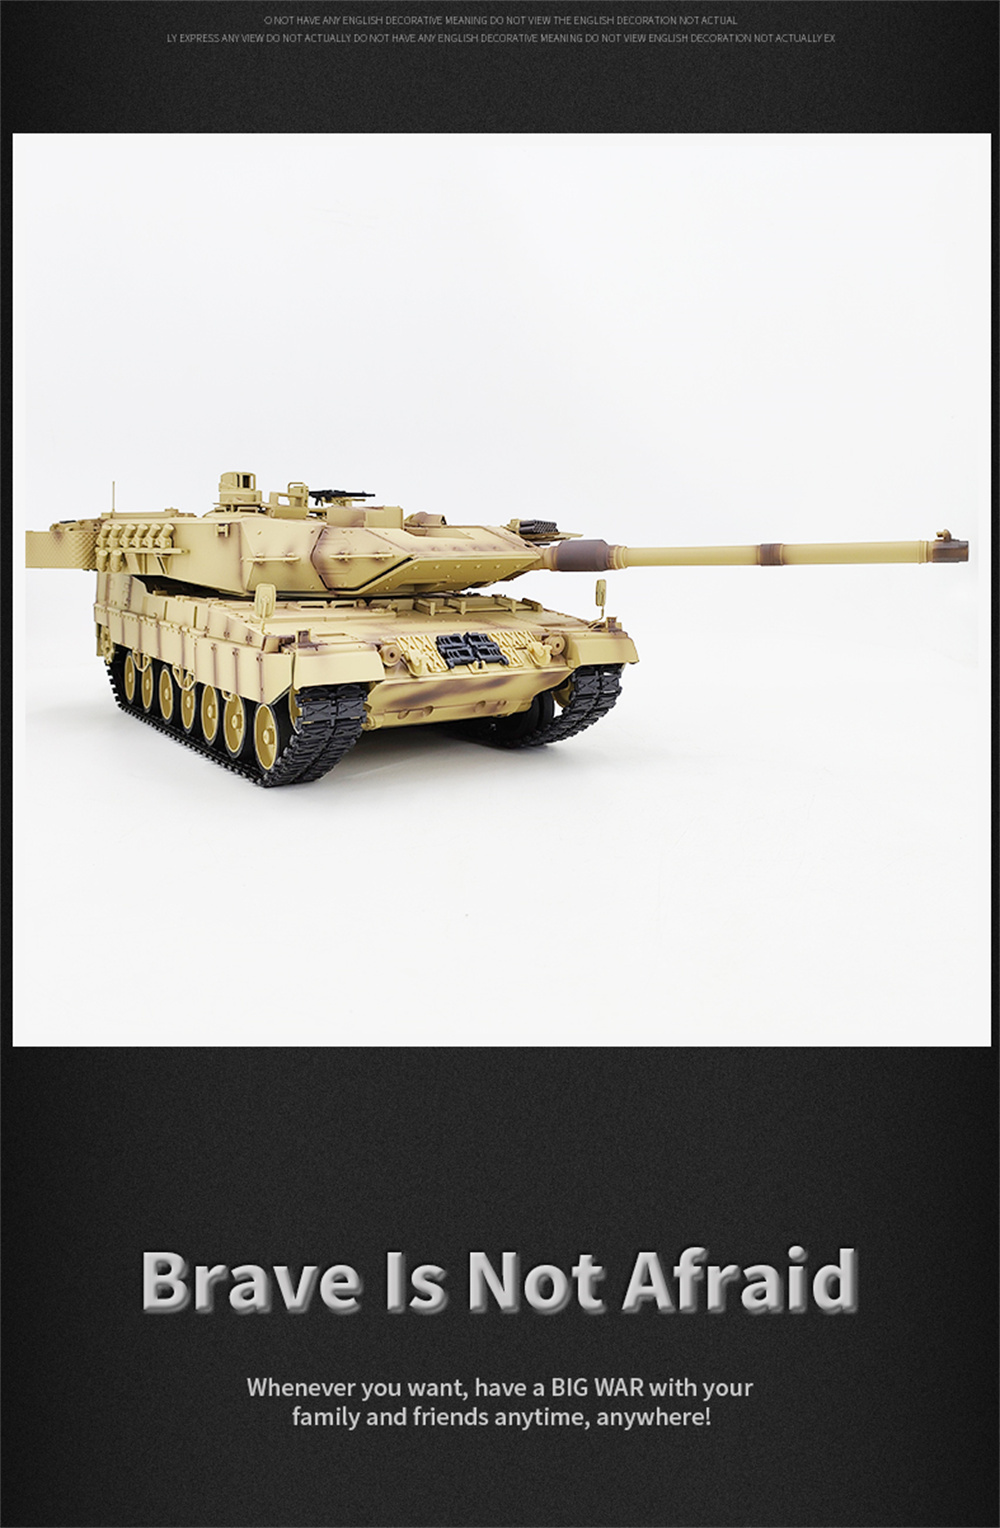 COOLBANK Model Leopard 2A7 1/16 2.4G RC Main Battle Tank Smoke Sound Recoil Shooting LED Light Simulated Vehicles Models RTR Toys